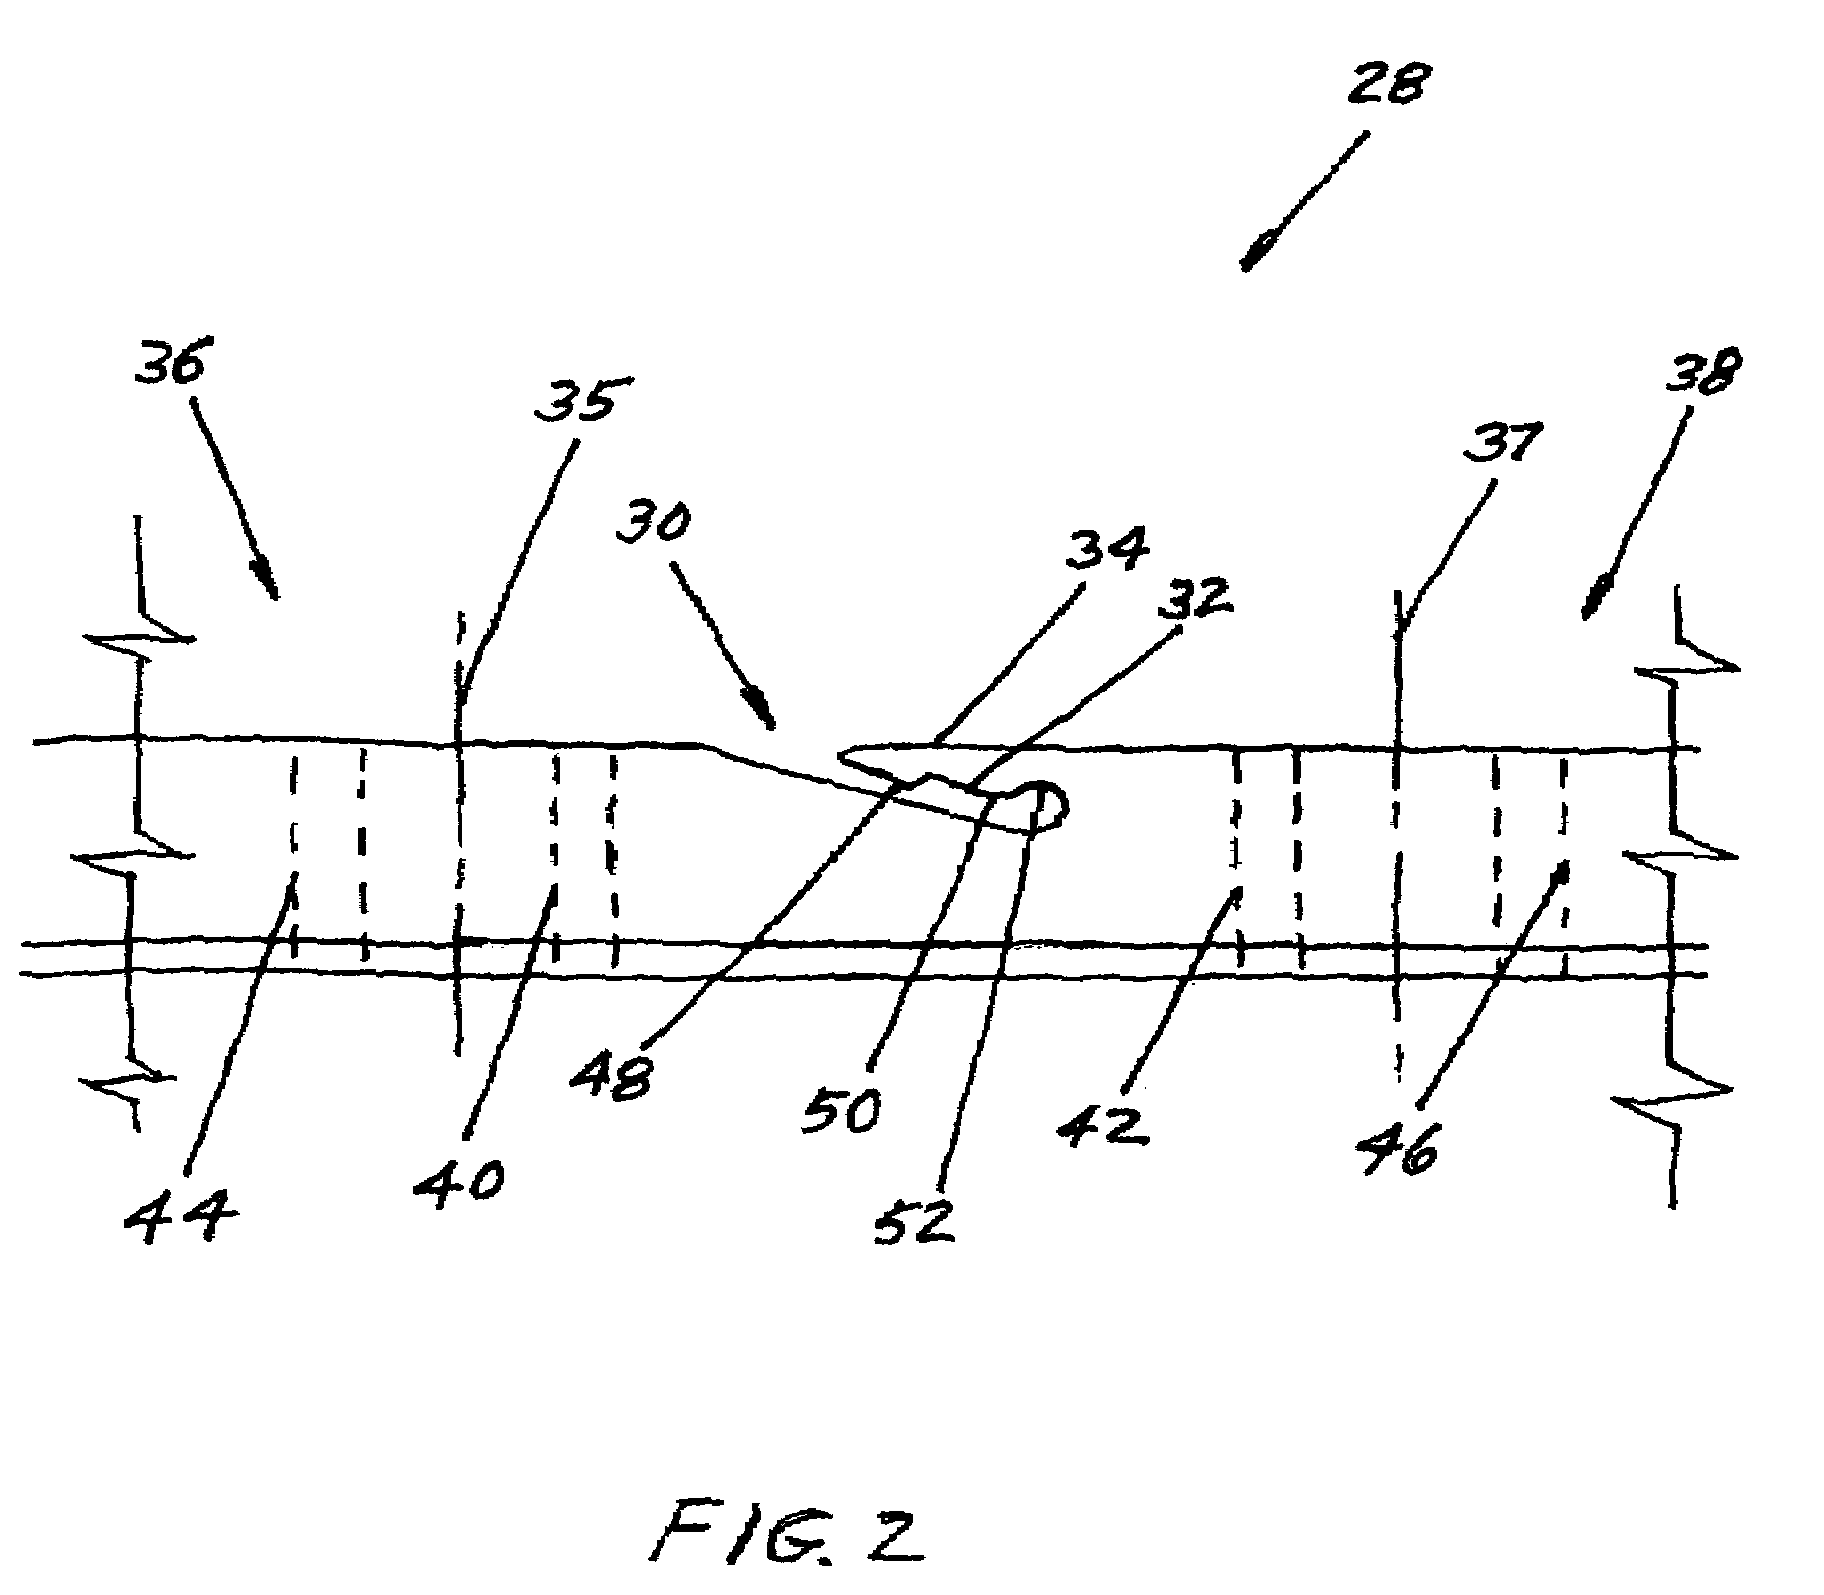 Fixture for hanging wire fence